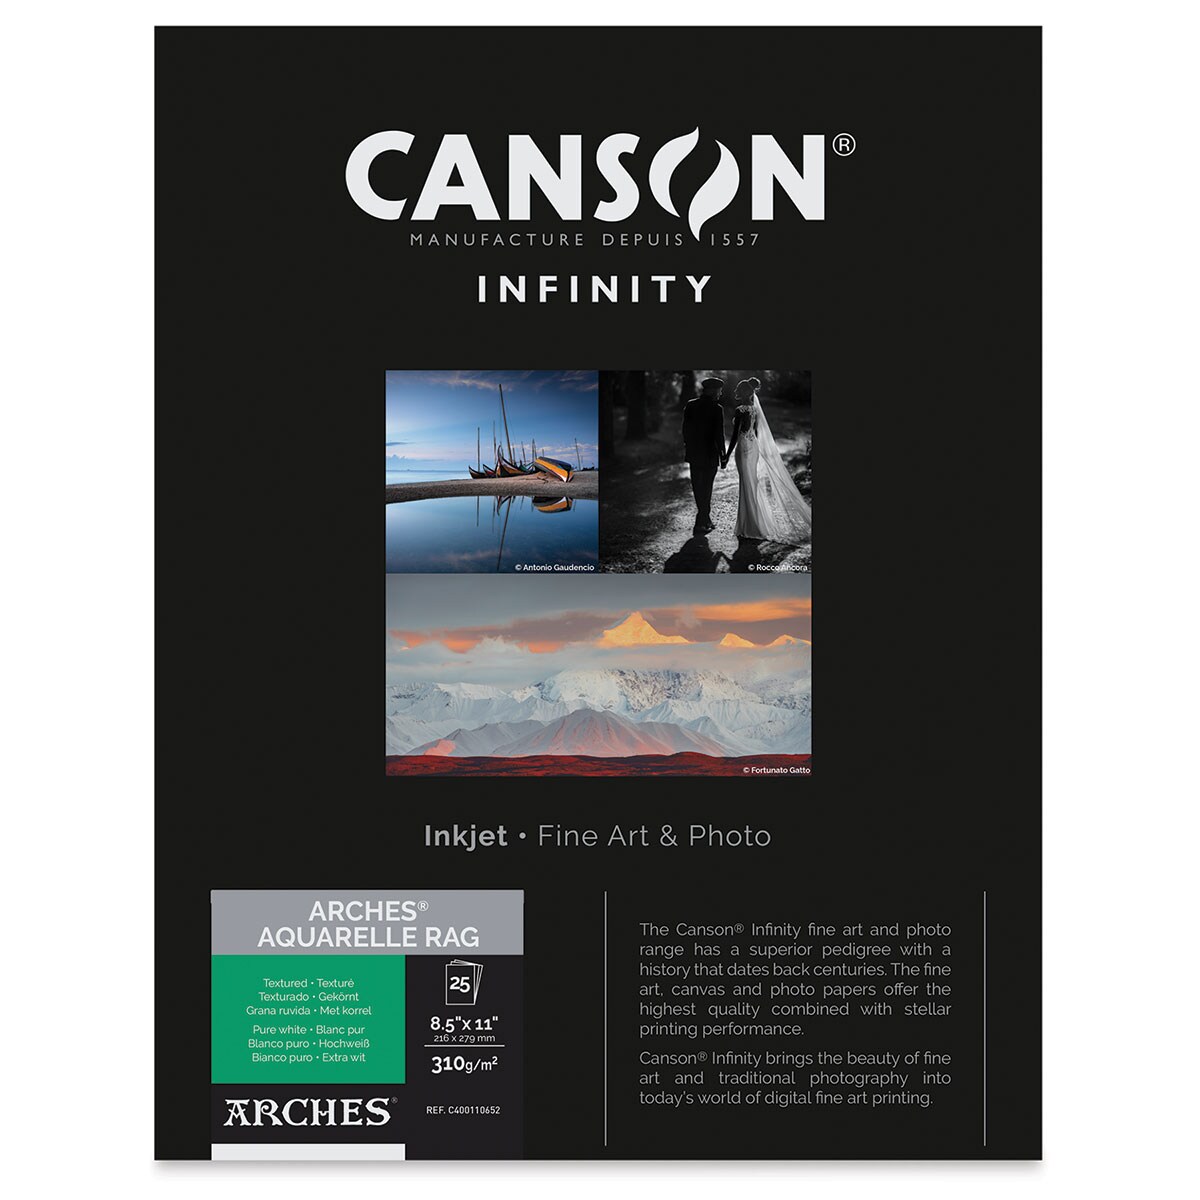 Canson Infinity Arches Aquarelle Rag Inkjet Paper - 8-1/2&#x22; x 11&#x22;, 310 gsm, Package of 25